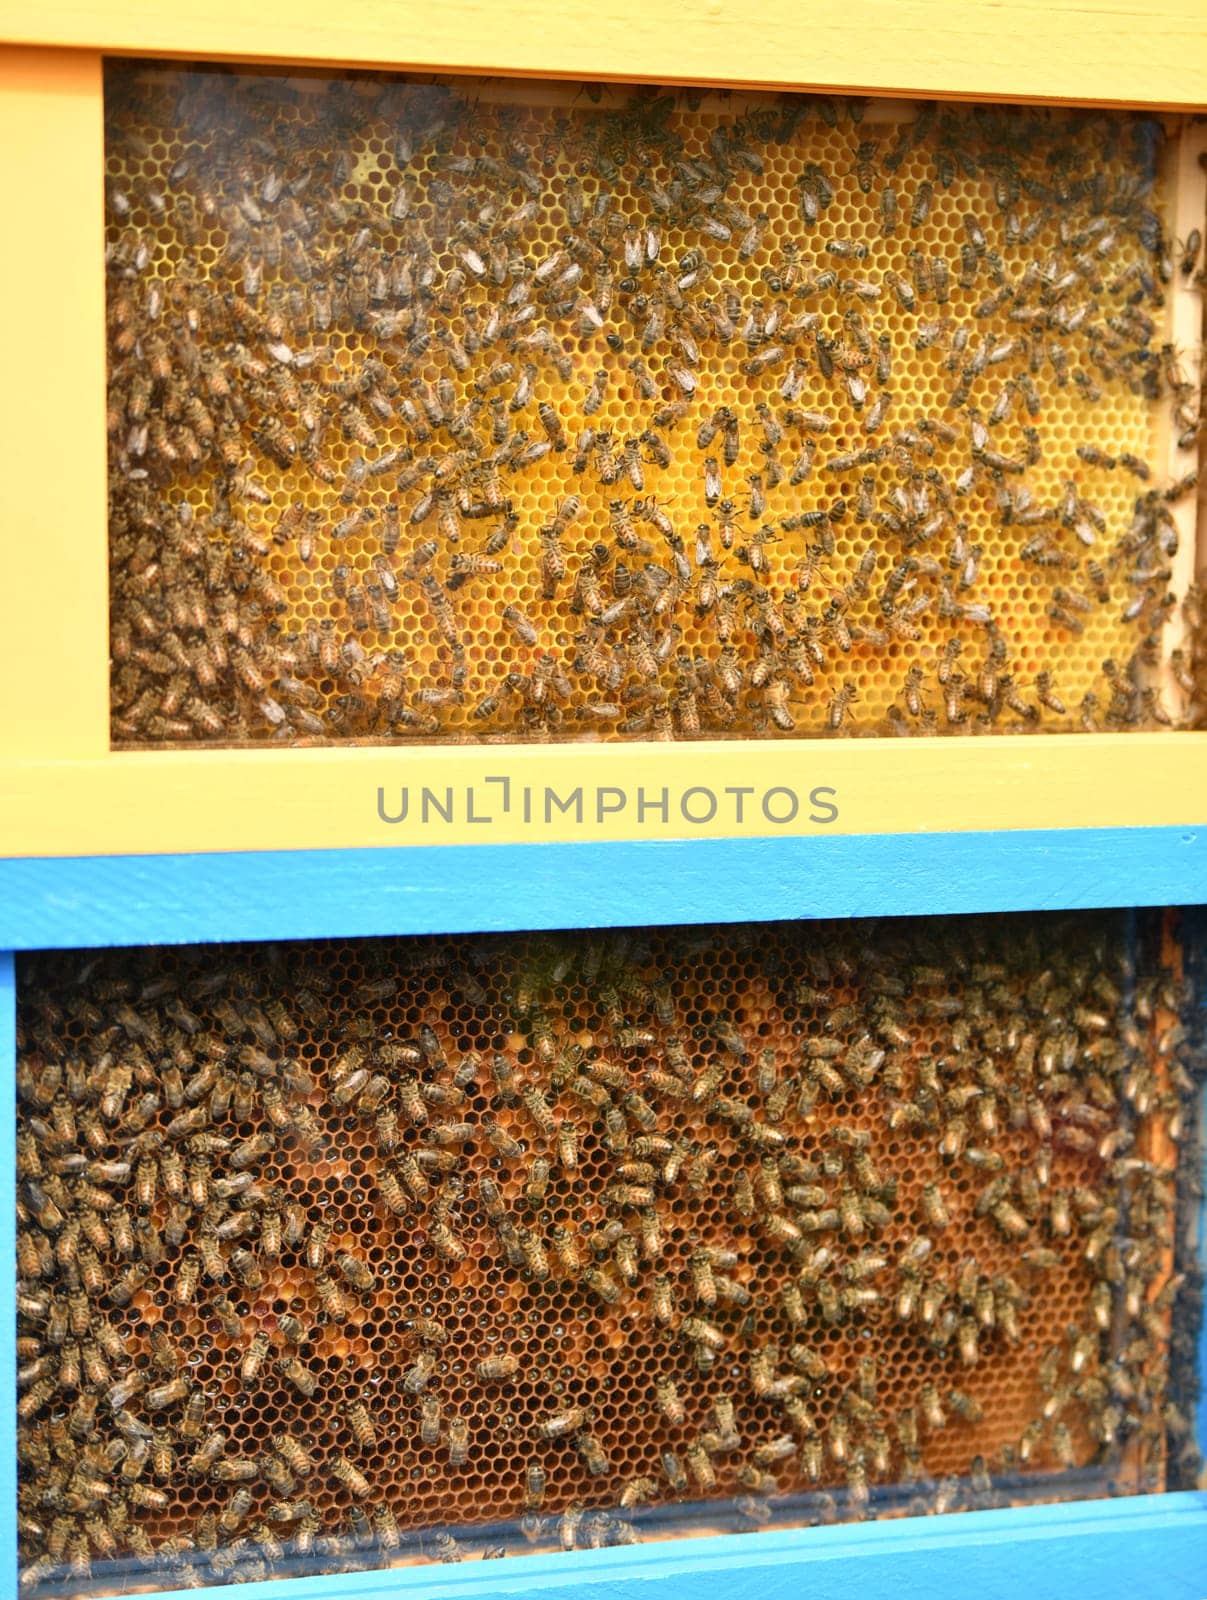 A beehive with bees. Close up